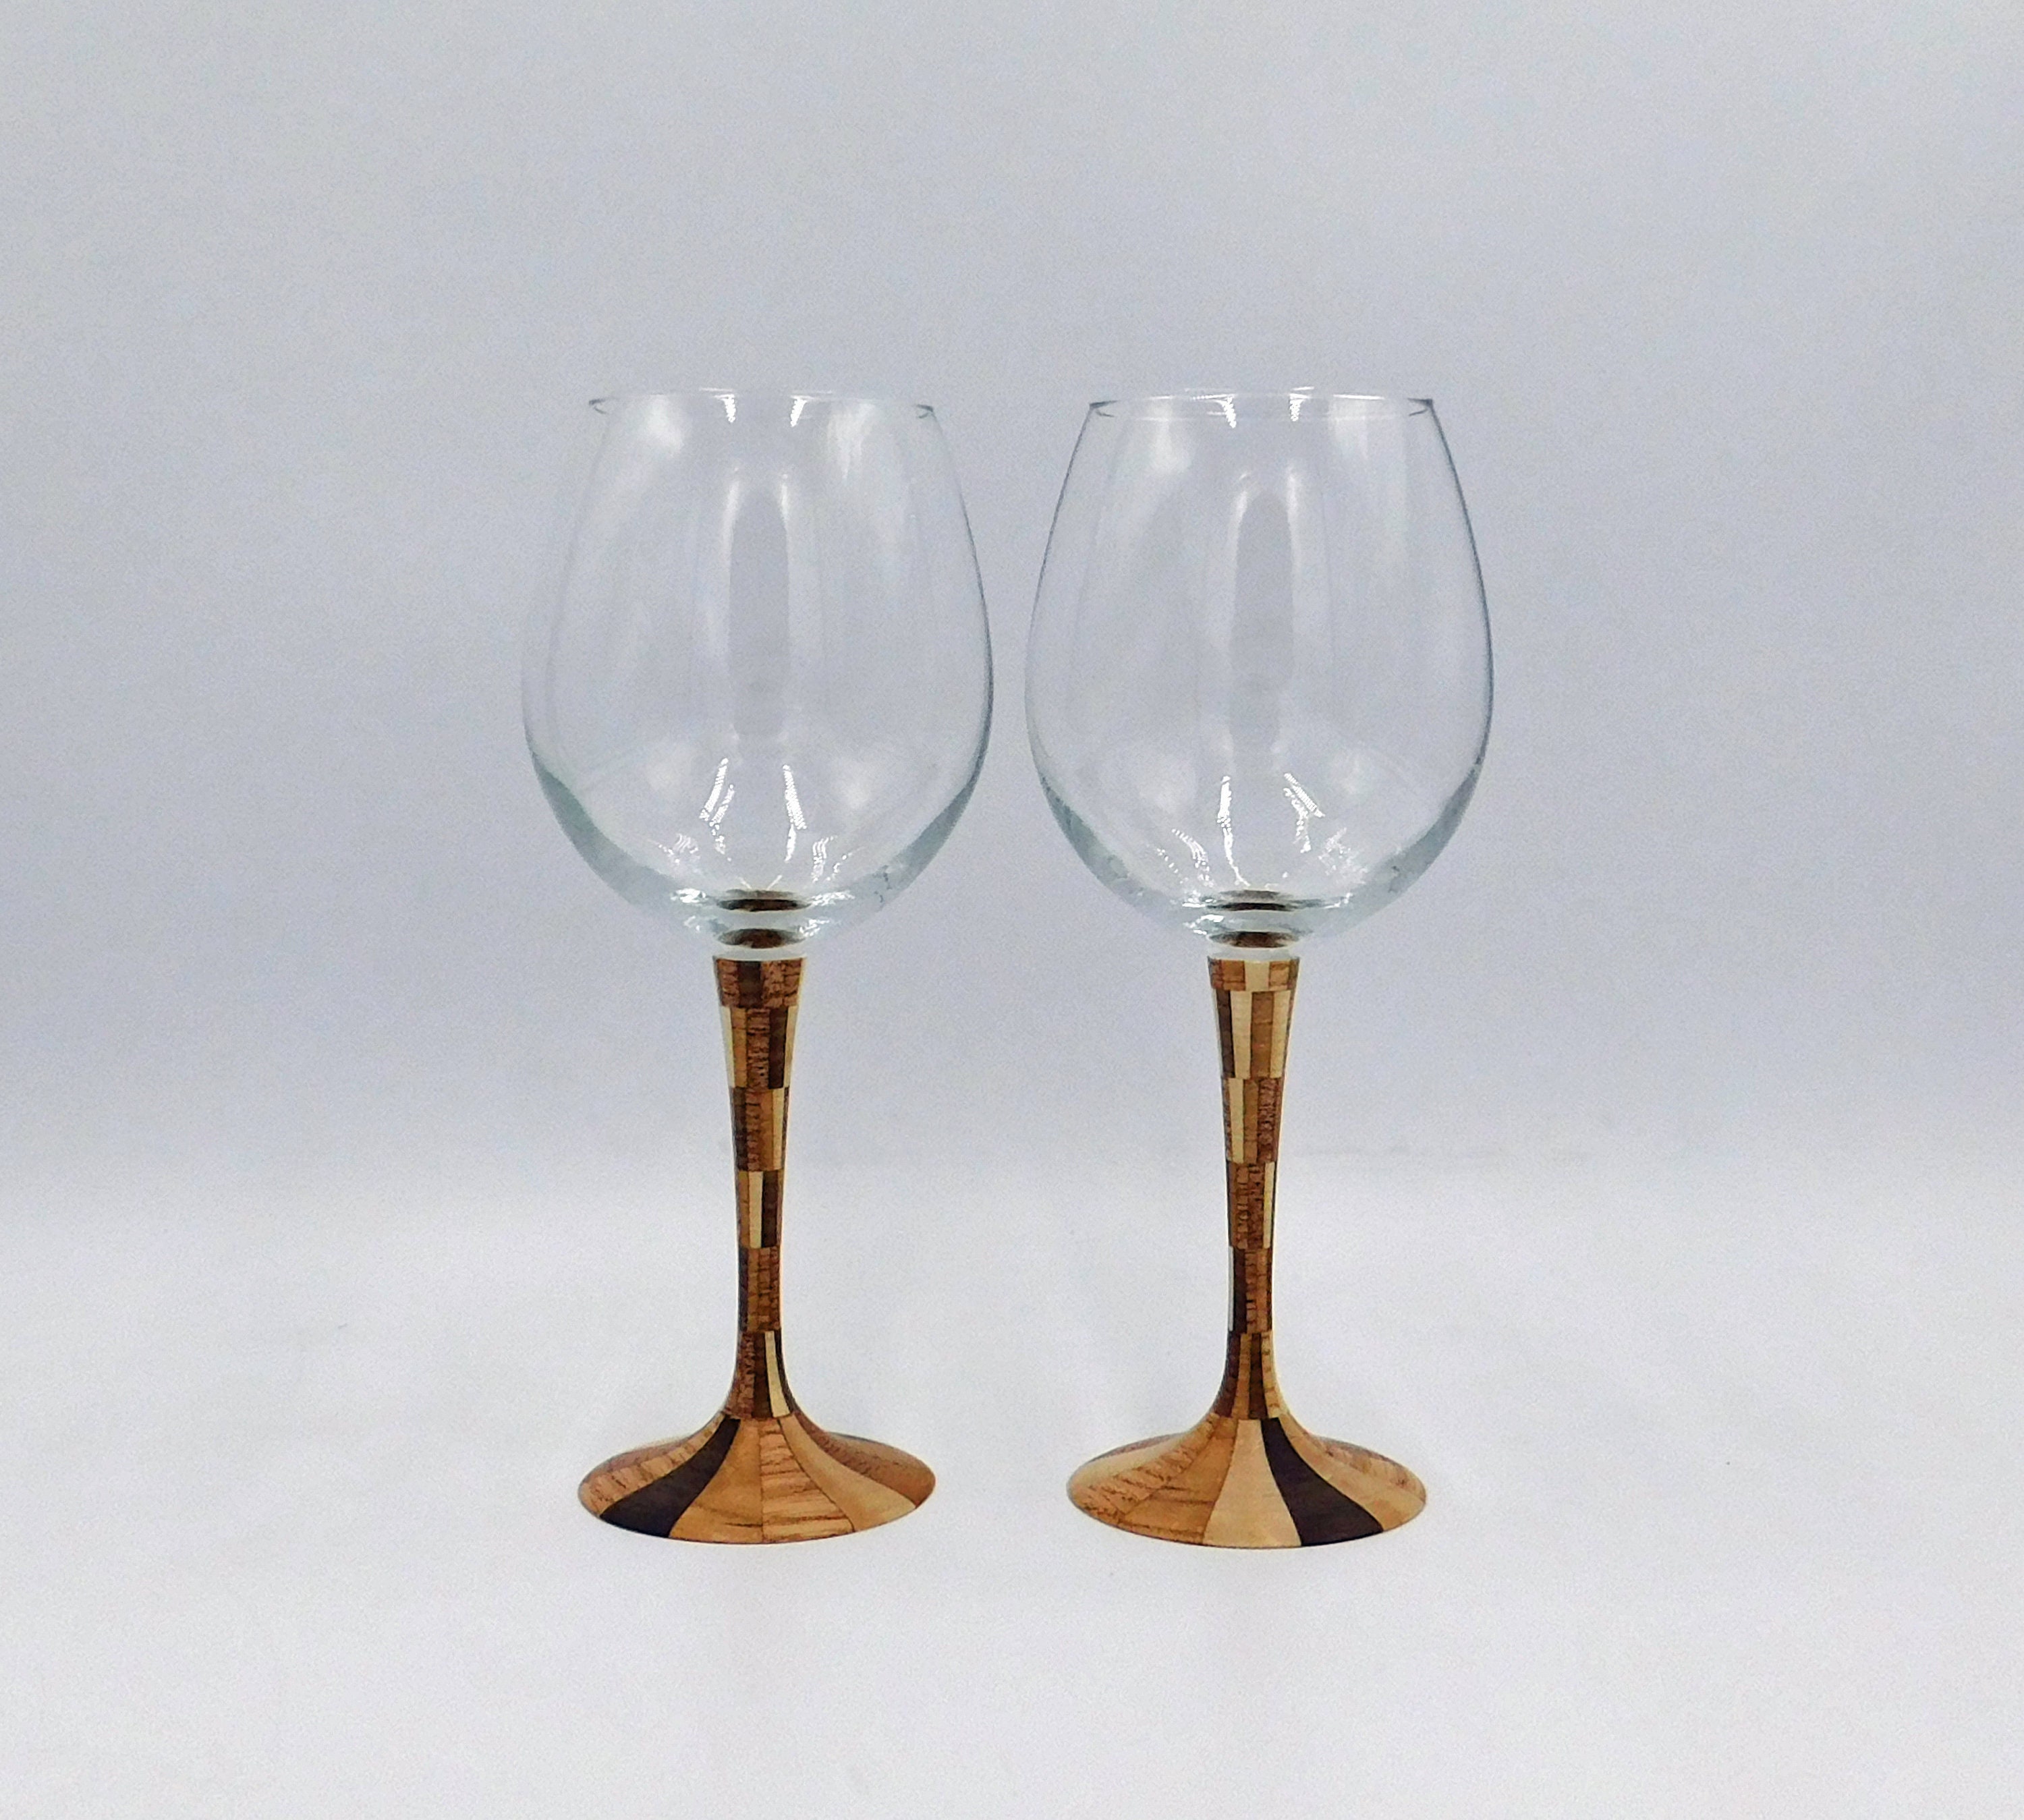 Unique Hand Made Wine Glasses Wood Stem with Turquoise Inlay